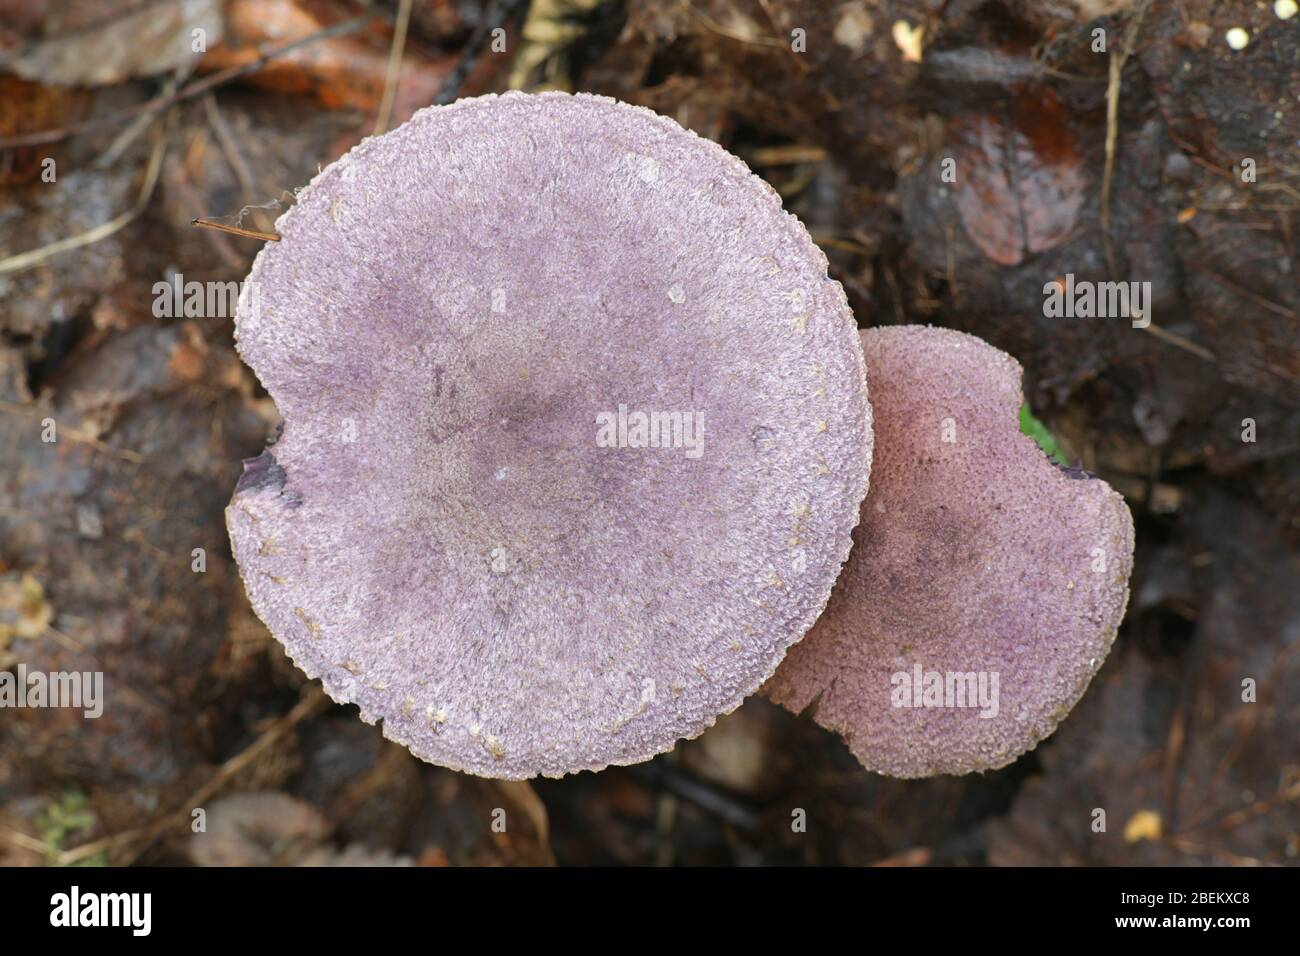 Cortinarius violaceus, known as the violet webcap or violet cort, mushrooms from Finland Stock Photo